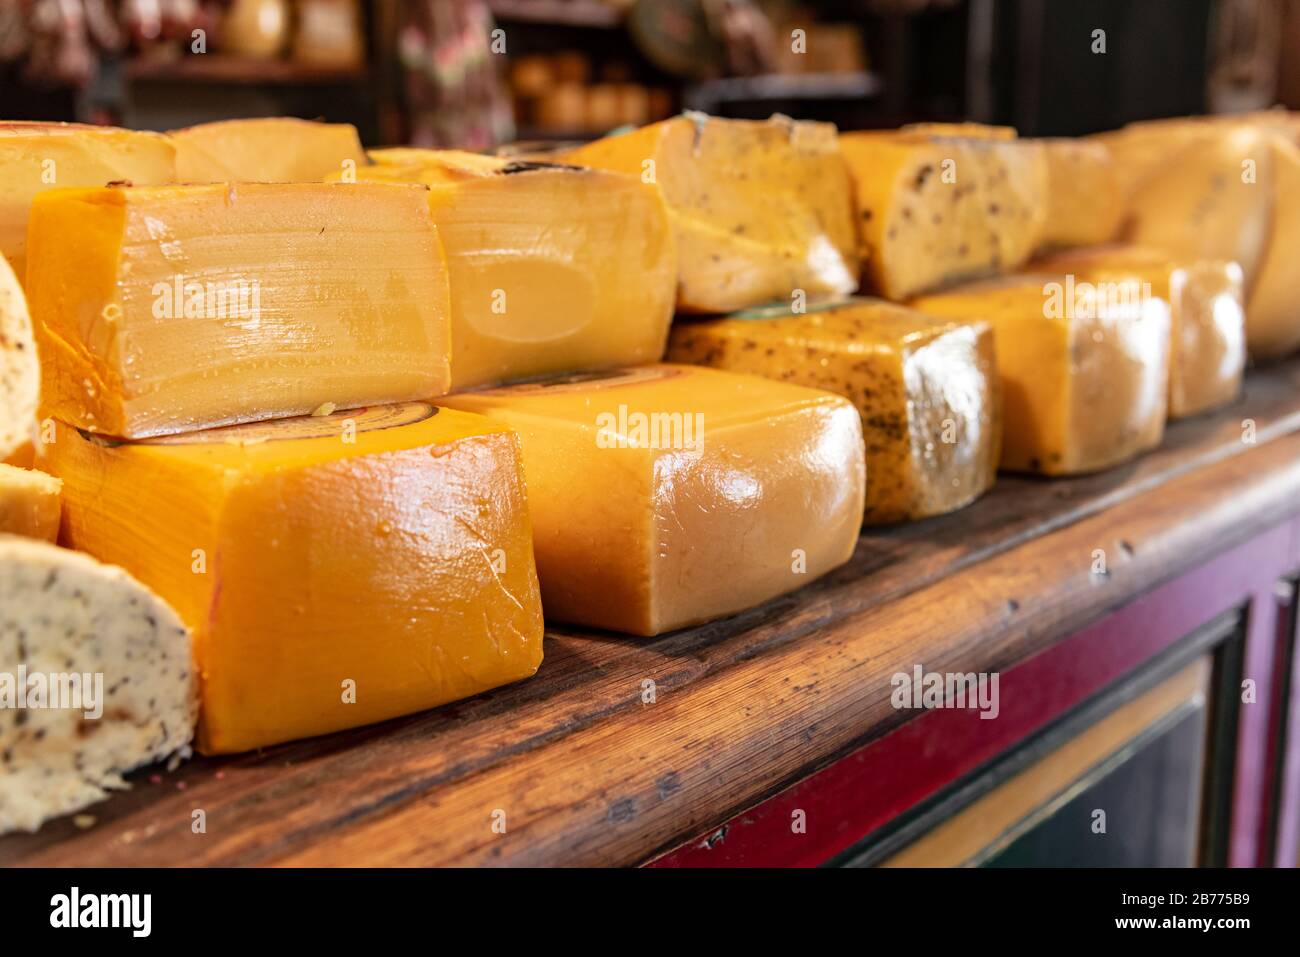 Different sort of cheeses on a wooden board for sale Stock Photo